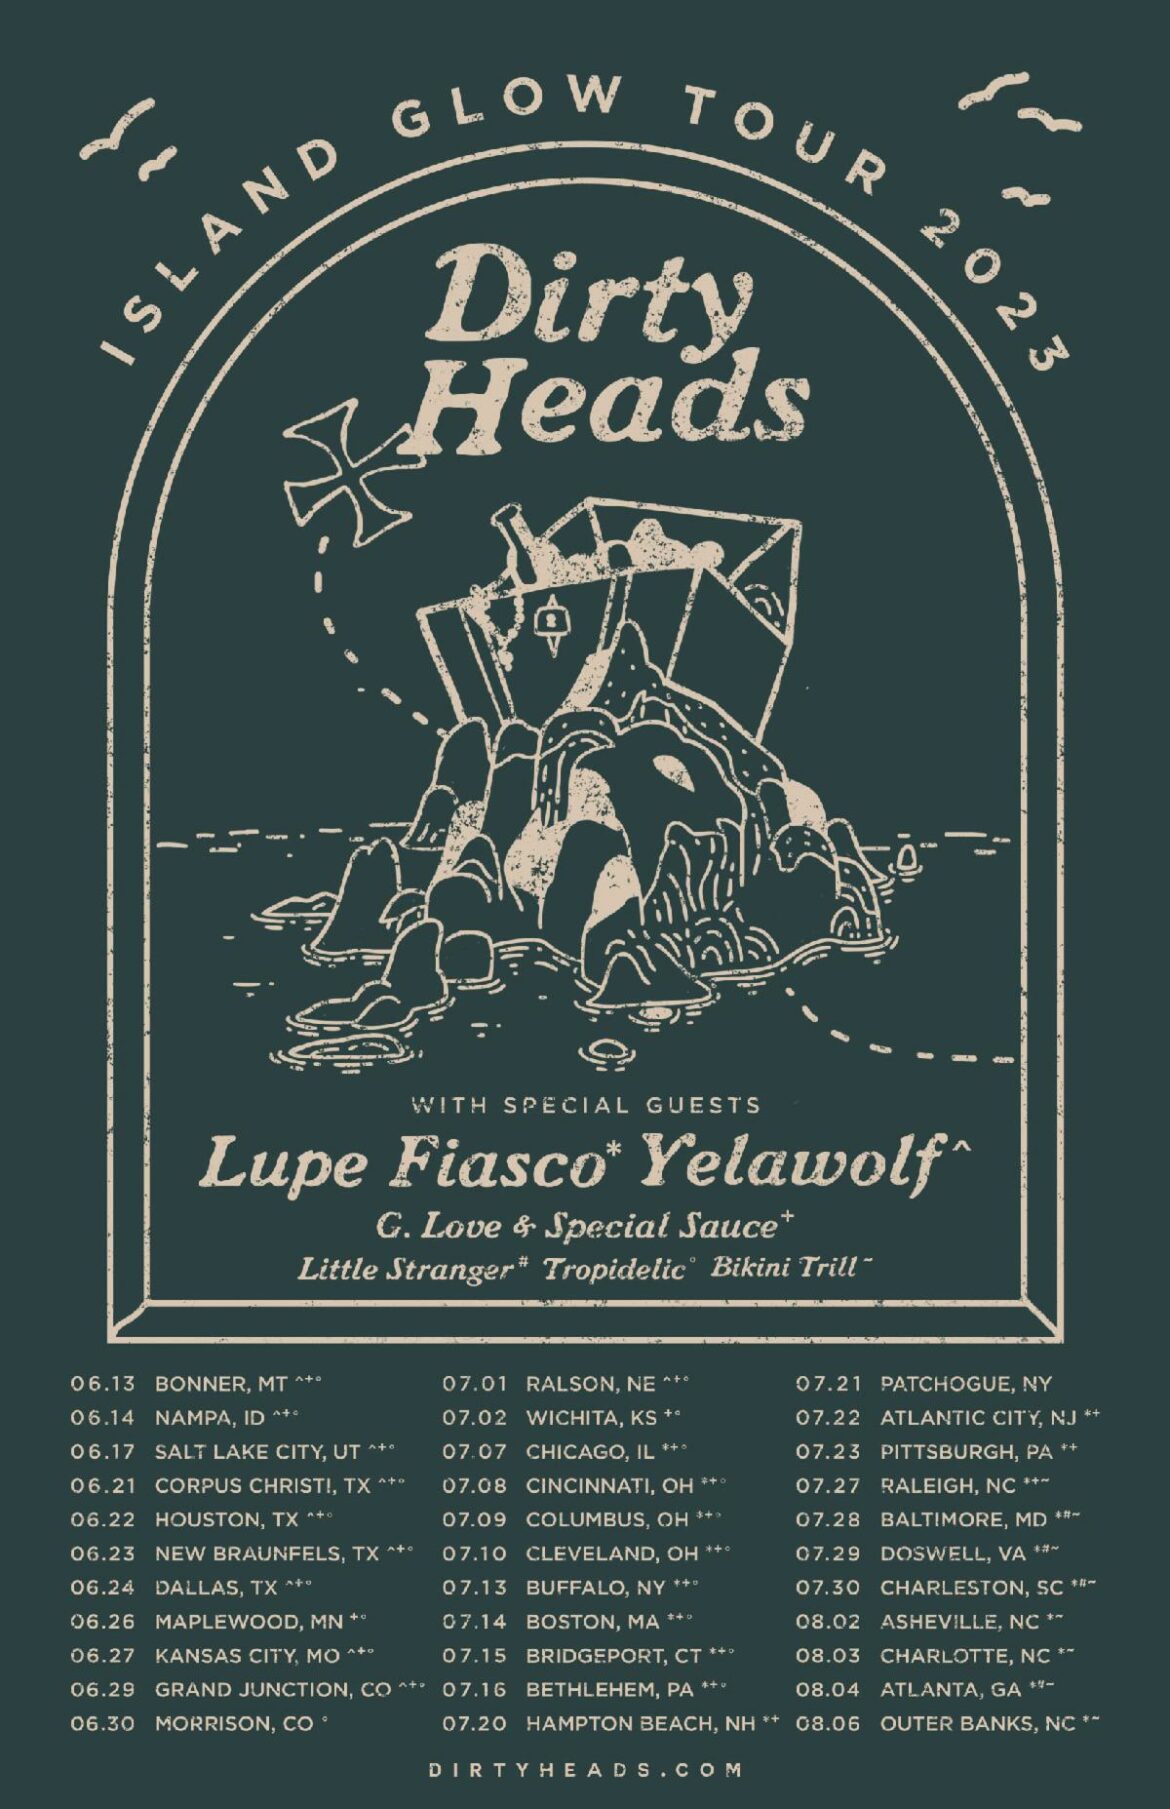 Dirty Heads Confirm “Island Glow Summer Tour” feat. Lupe Fiasco and